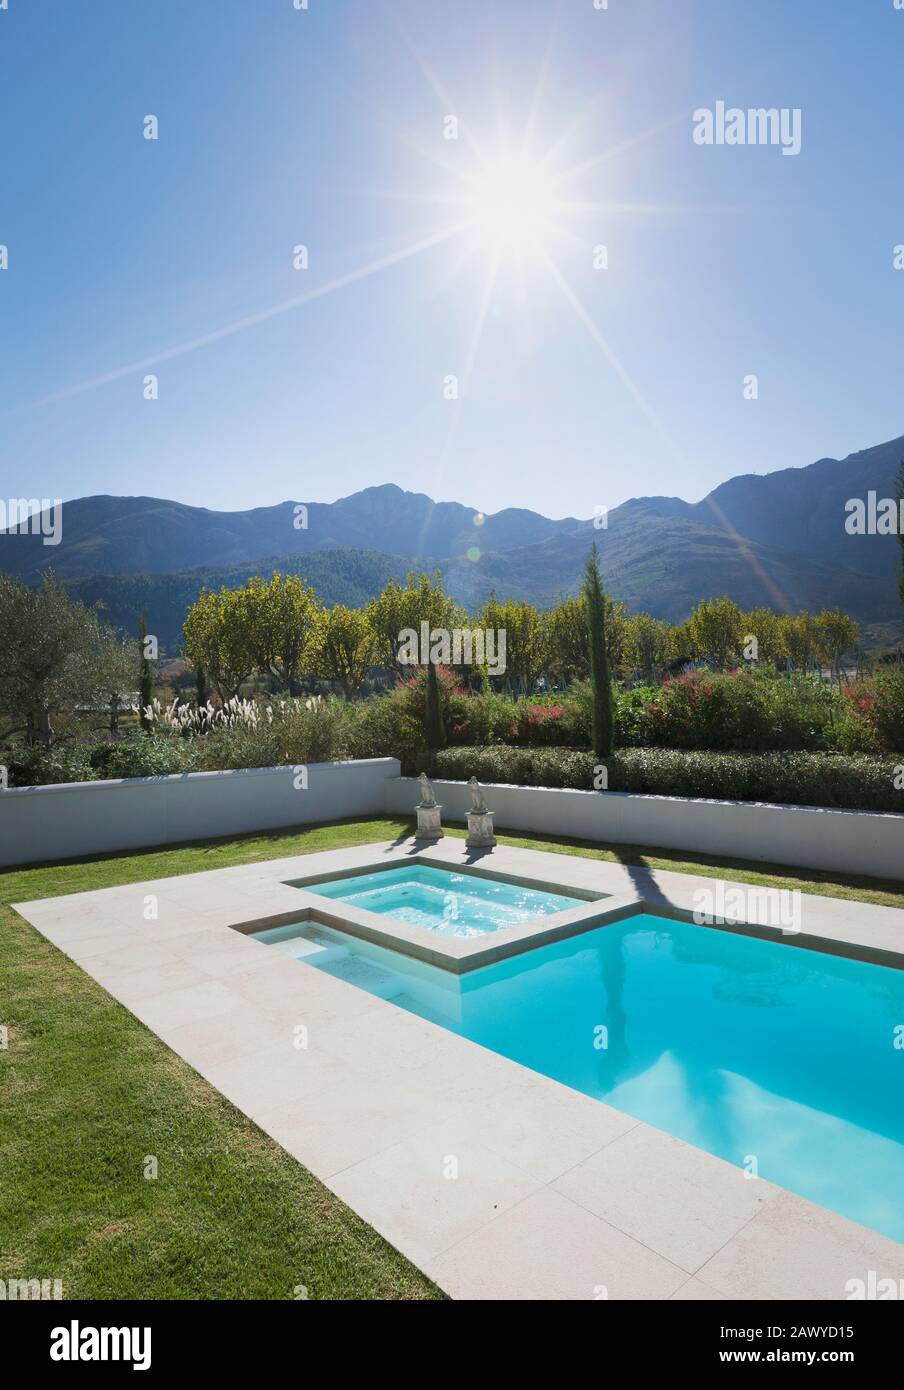 Sun shining over idyllic, tranquil lap pool with mountain view Stock Photo